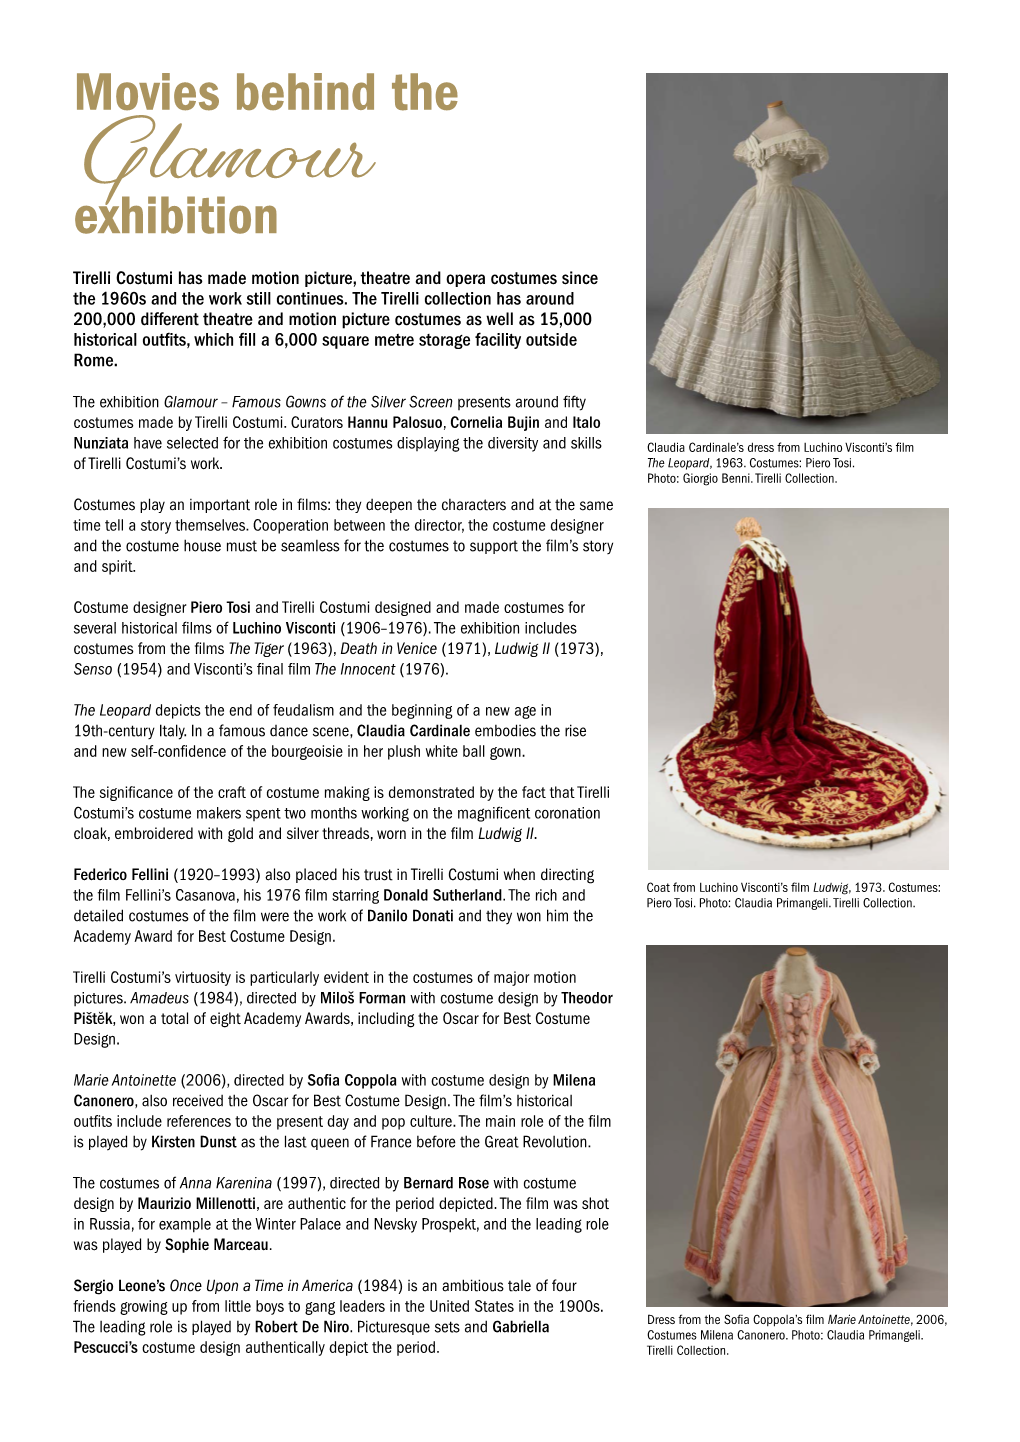 Glamourtirelli Costumi Has Made Motion Picture, Theatre and Opera Costumes Since the 1960S and the Work Still Continues